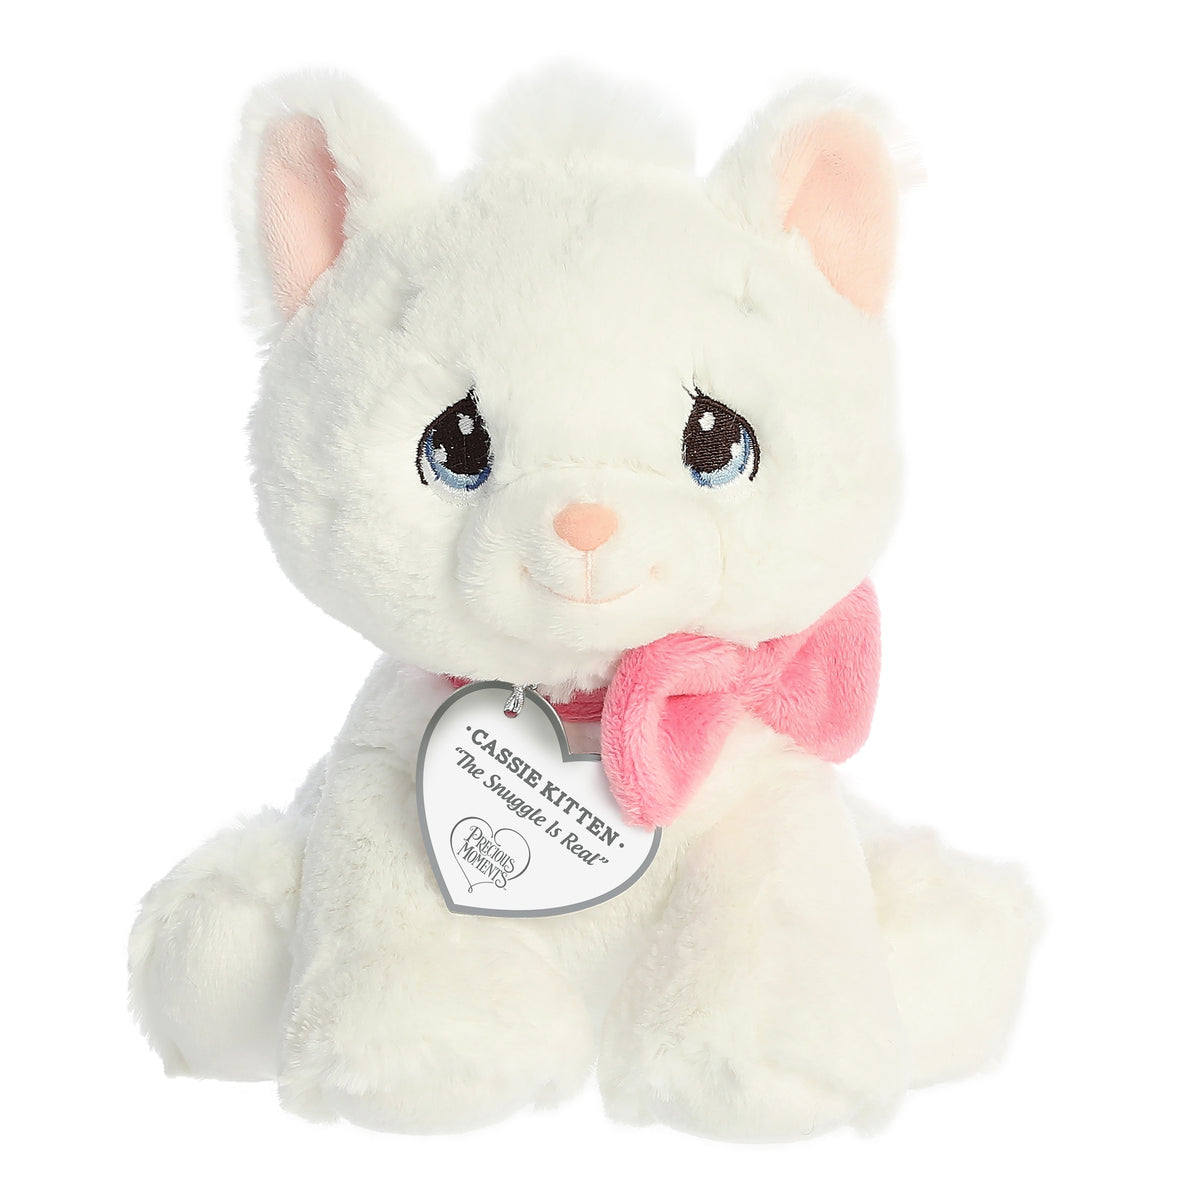 A seated all-white kitten plush with tear-drop eyes, pink bow, and a precious moments inspirational tag around its neck.